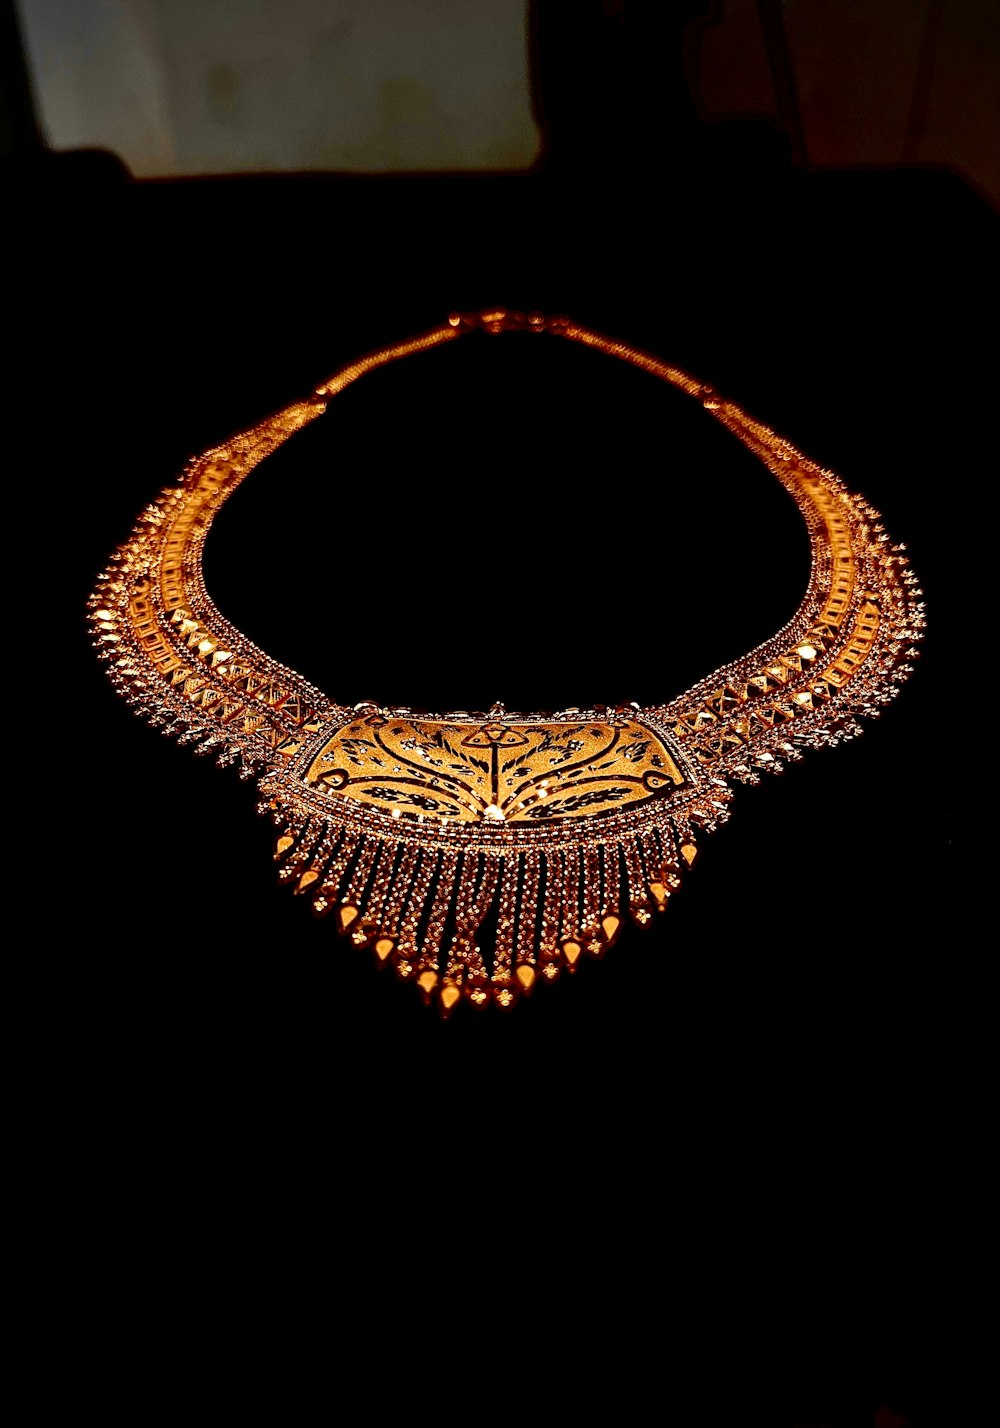 a gold necklace on display in a dark room